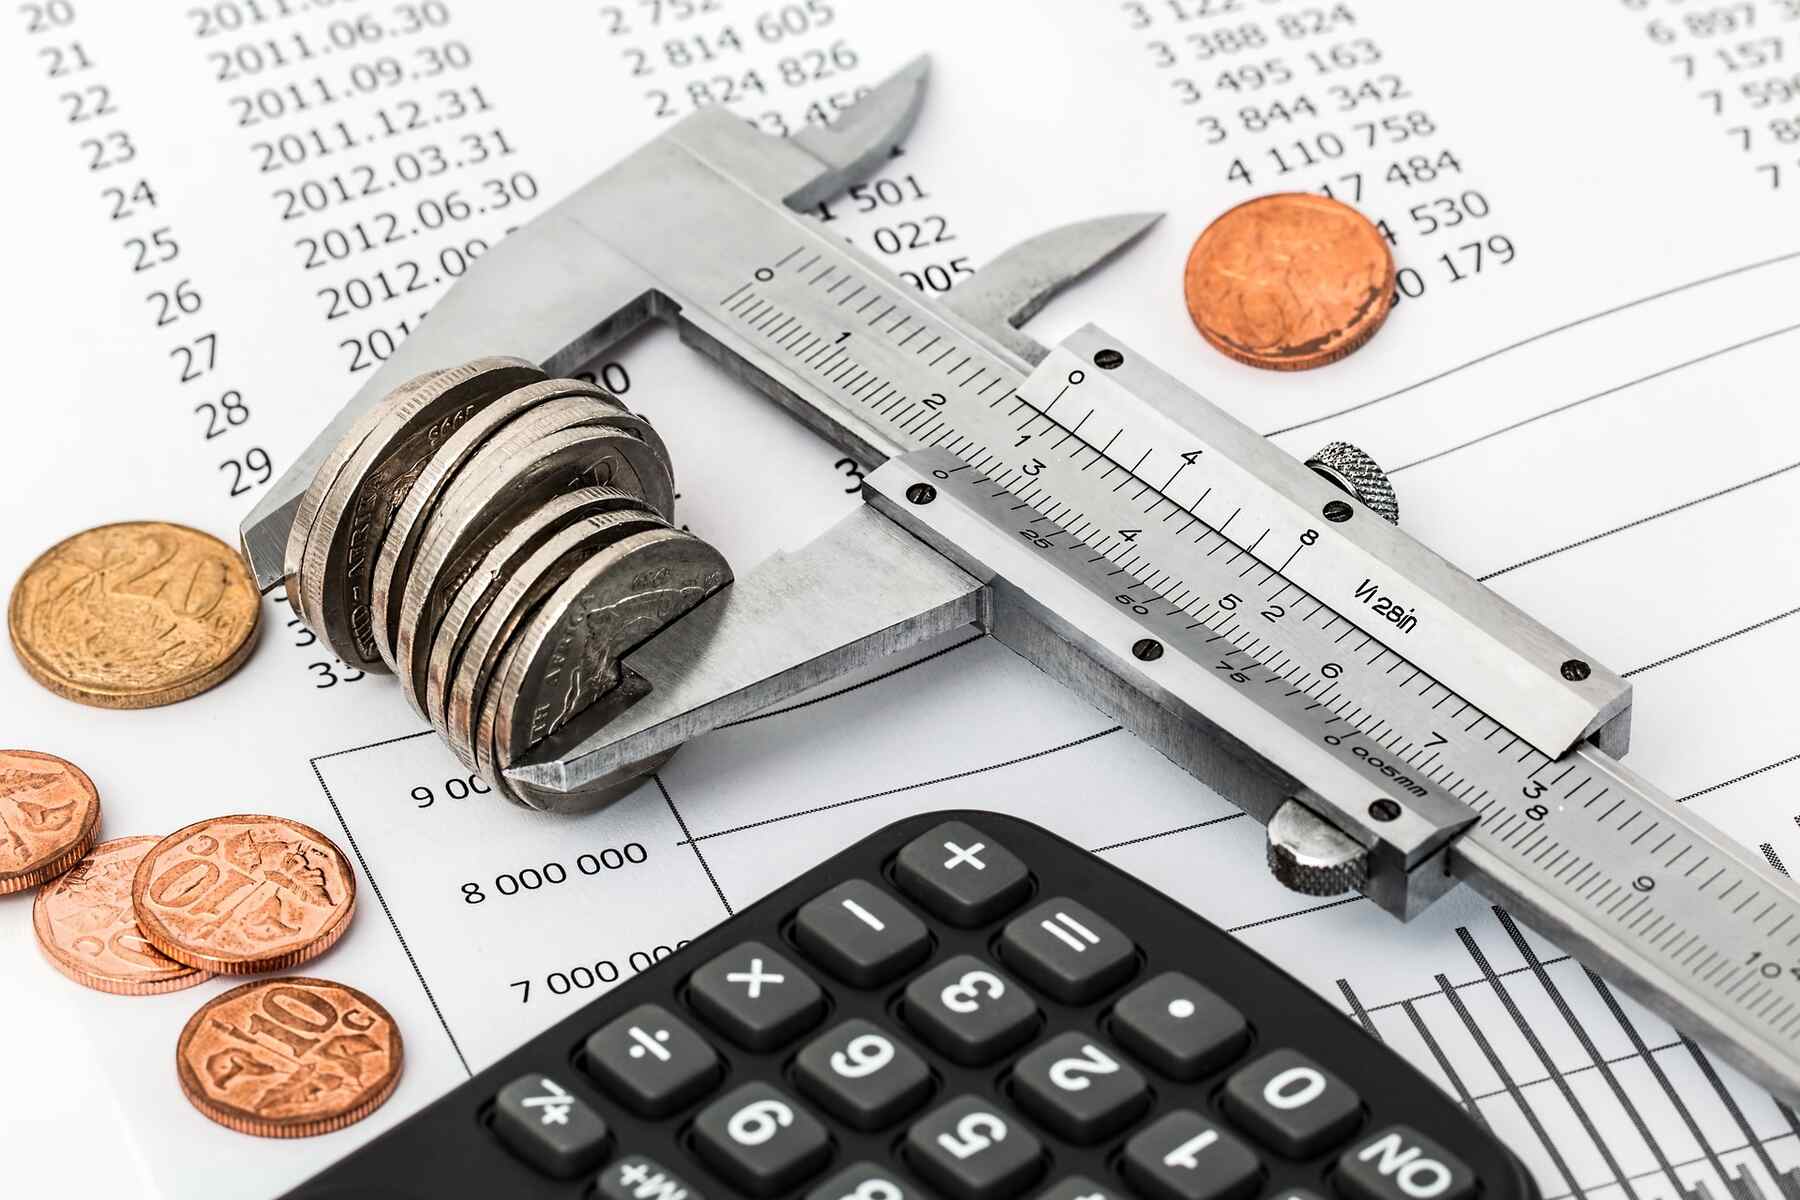 Caliper holding coins on top of a printed paper and beside a calculator